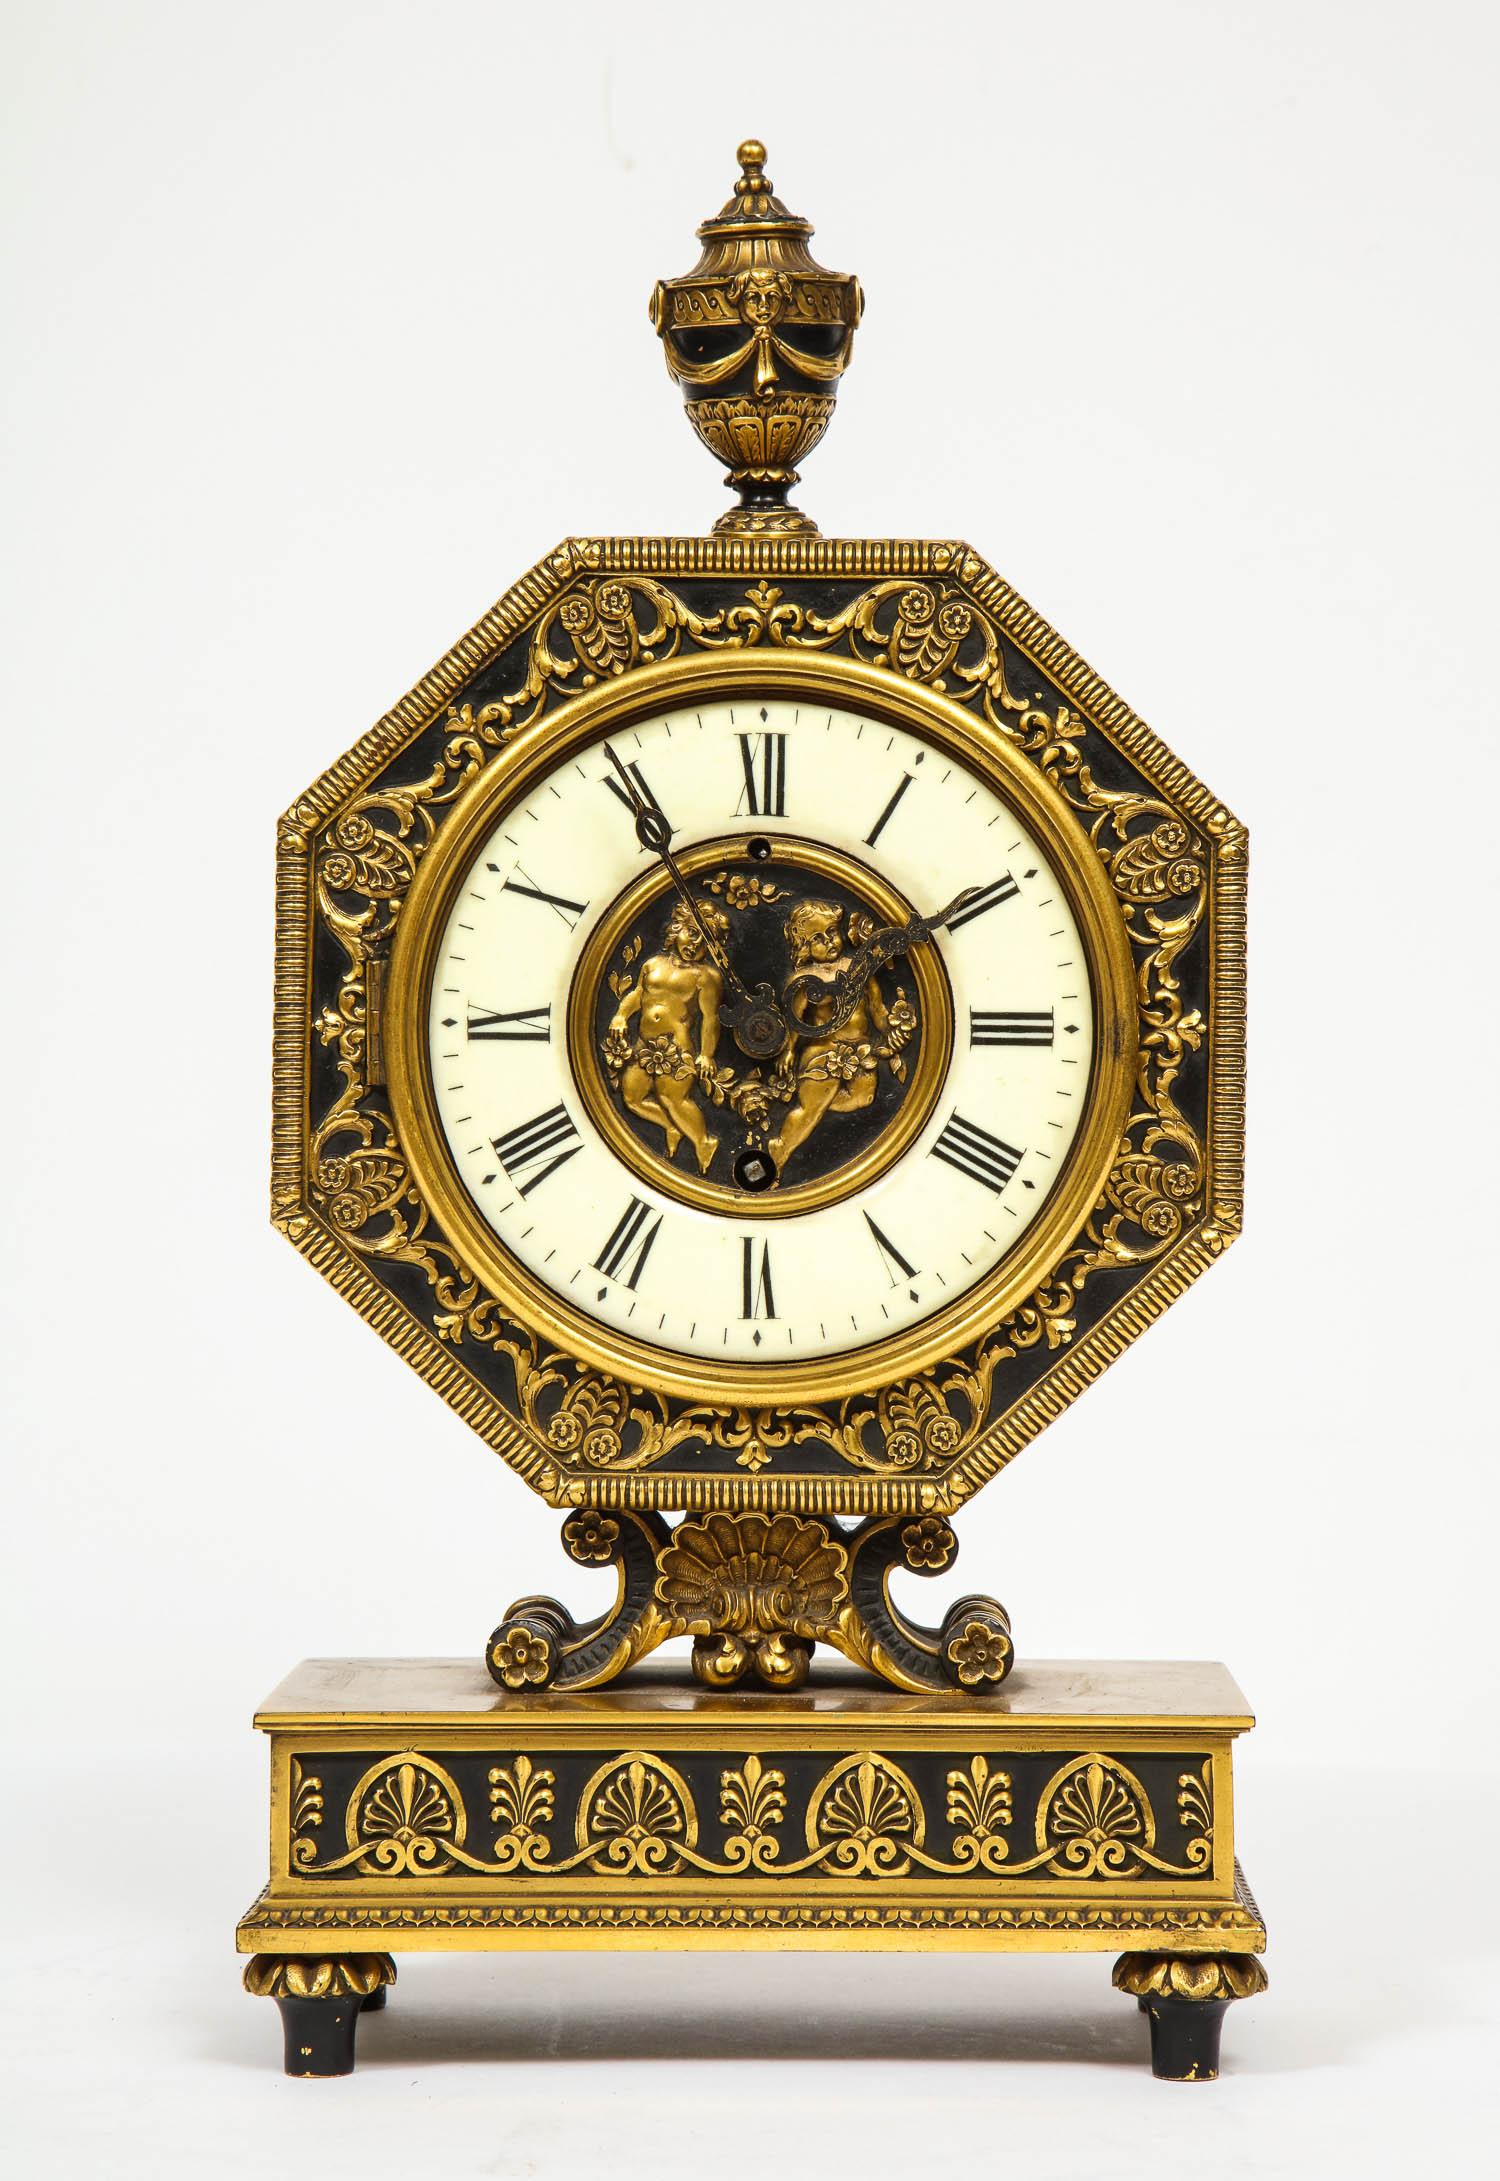 E.F. Caldwell & Co., an American gilt and patinated bronze ormolu clock,
late 19th/early 20th century.

Very high quality clock.

Enamel face and central reserve of two cherubs, New York, 
Inscribed 